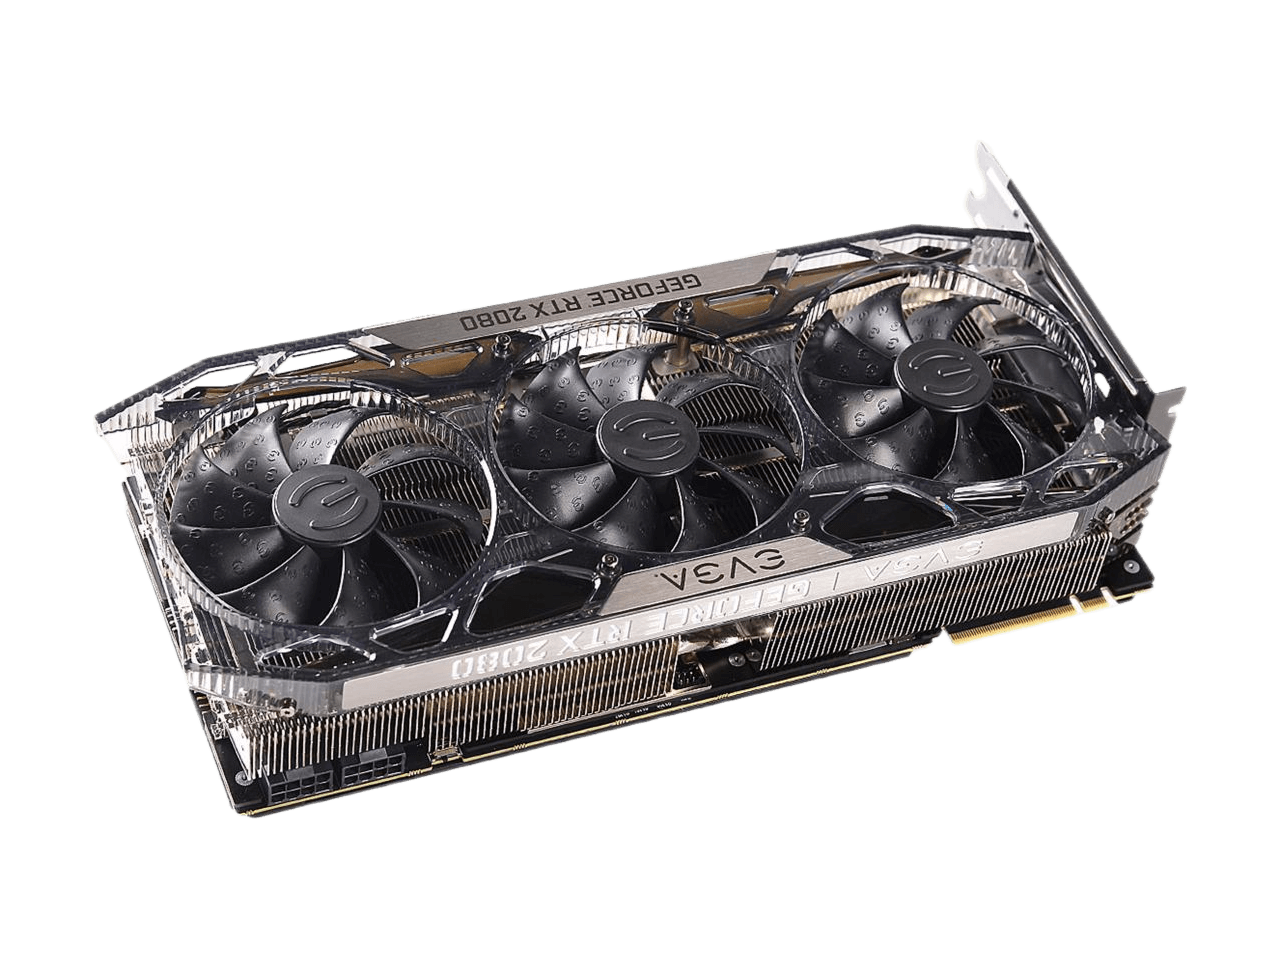 EVGA GeForce RTX 2080 FTW3 ULTRA OVERCLOCKED 8GB GDDR6 2.75 Slot Extreme Cool Triple + iCX2, 65C Gaming RGB Metal Backplate Video Graphics Card 08G-P4-2287-RX